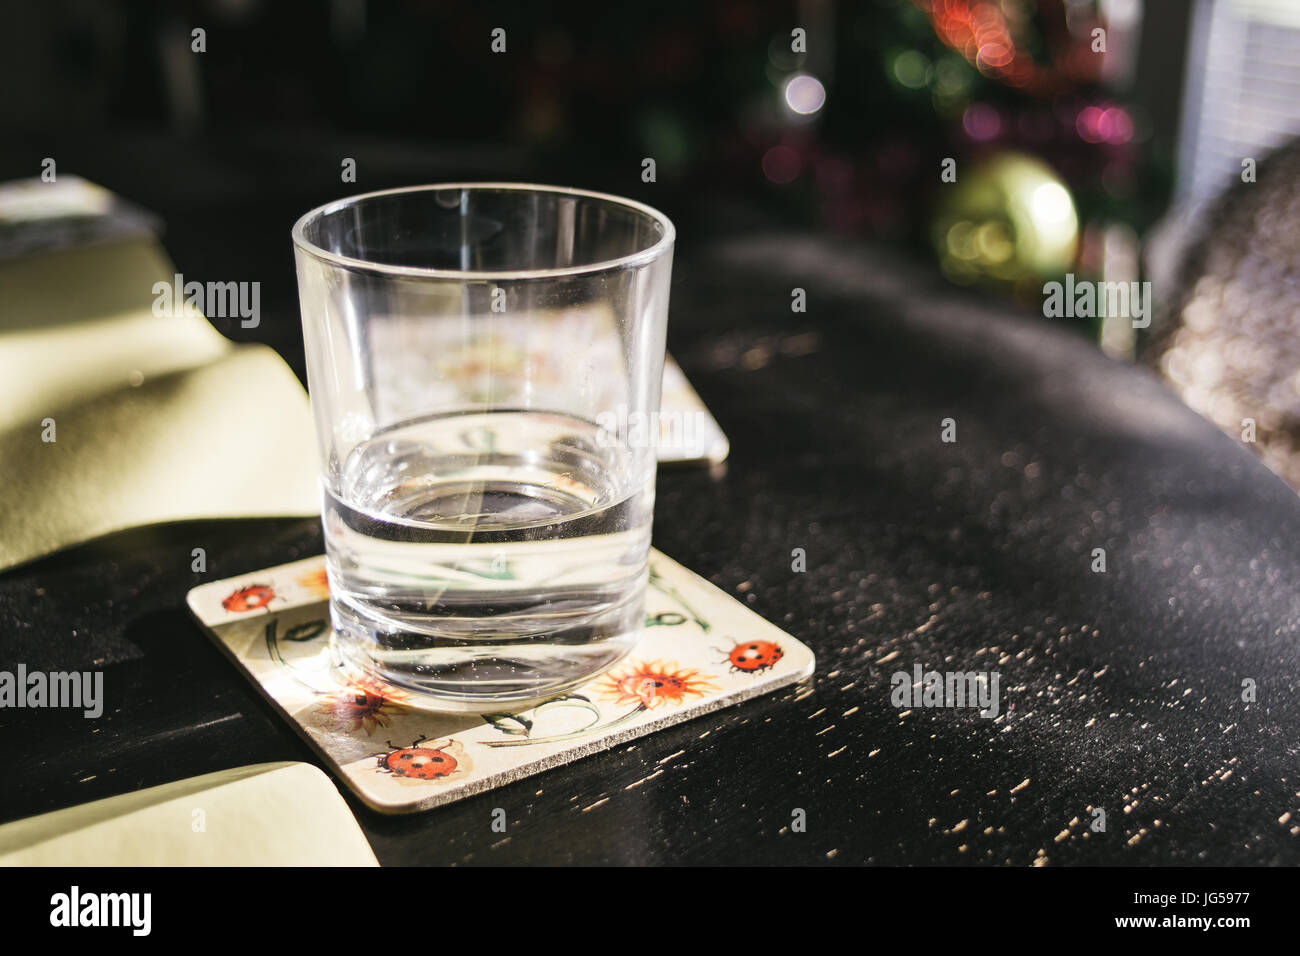 Glass of water standing on a black table. Stock Photo